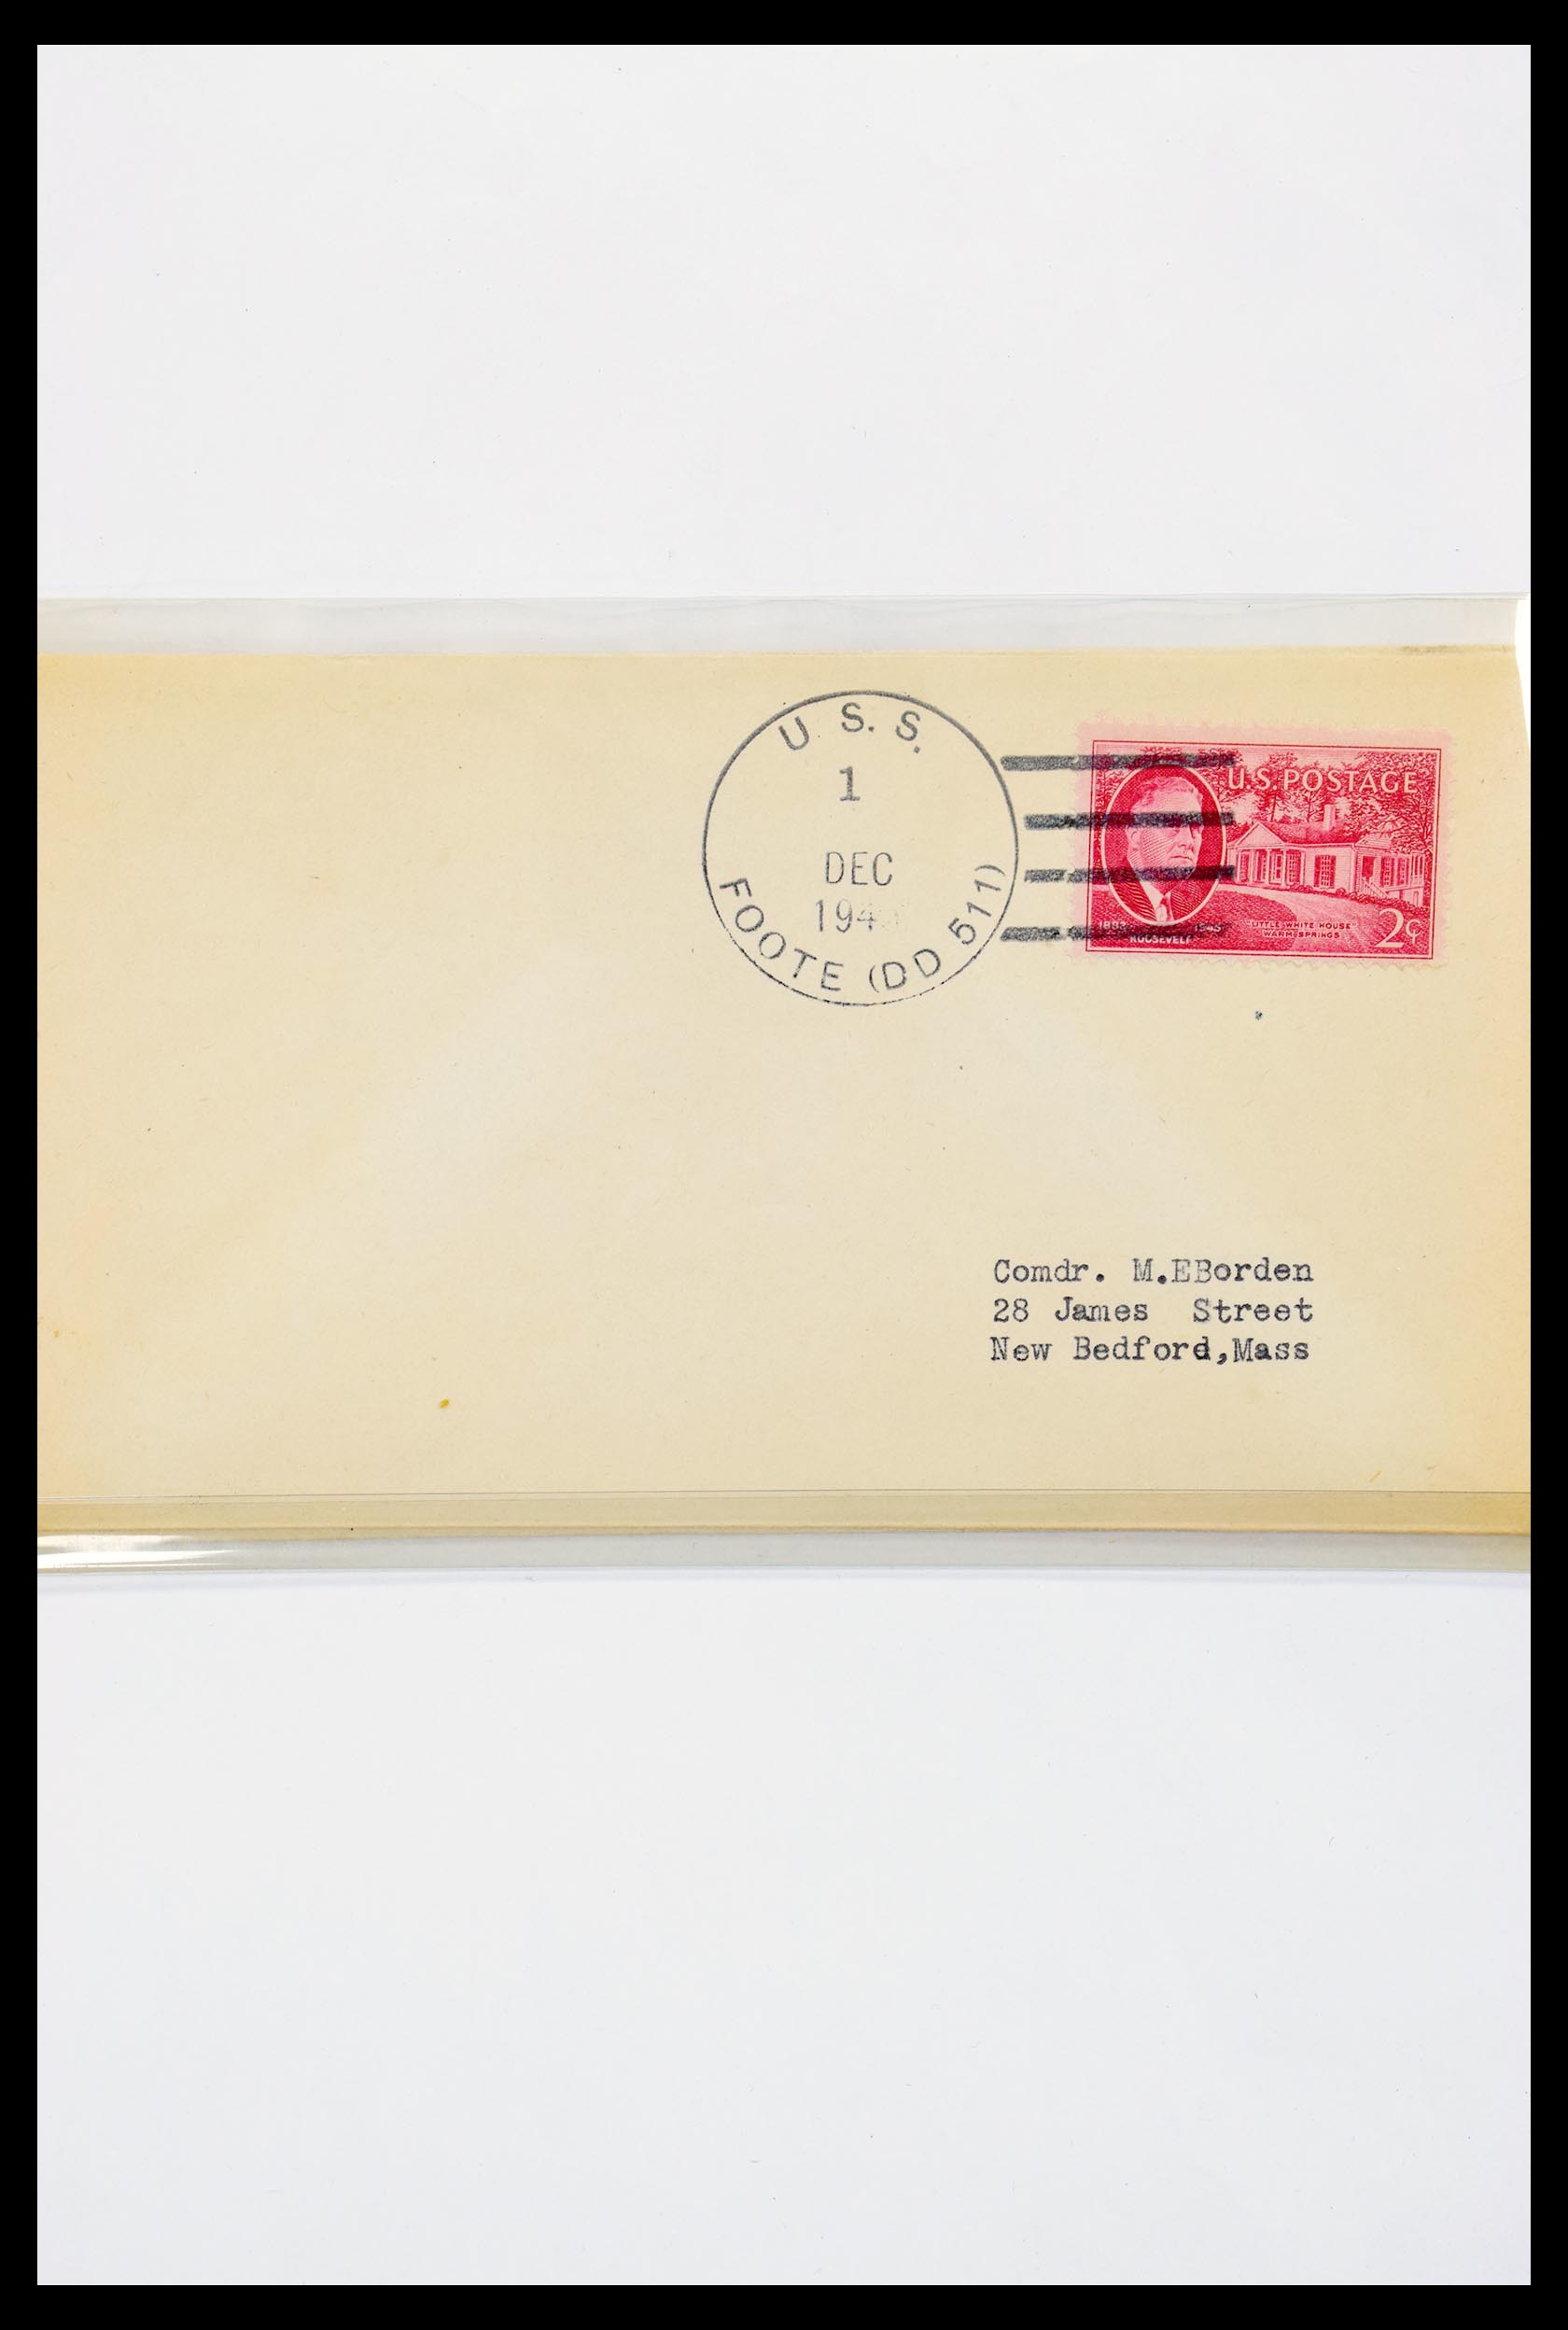 30341 311 - 30341 USA naval cover collection 1930-1970.